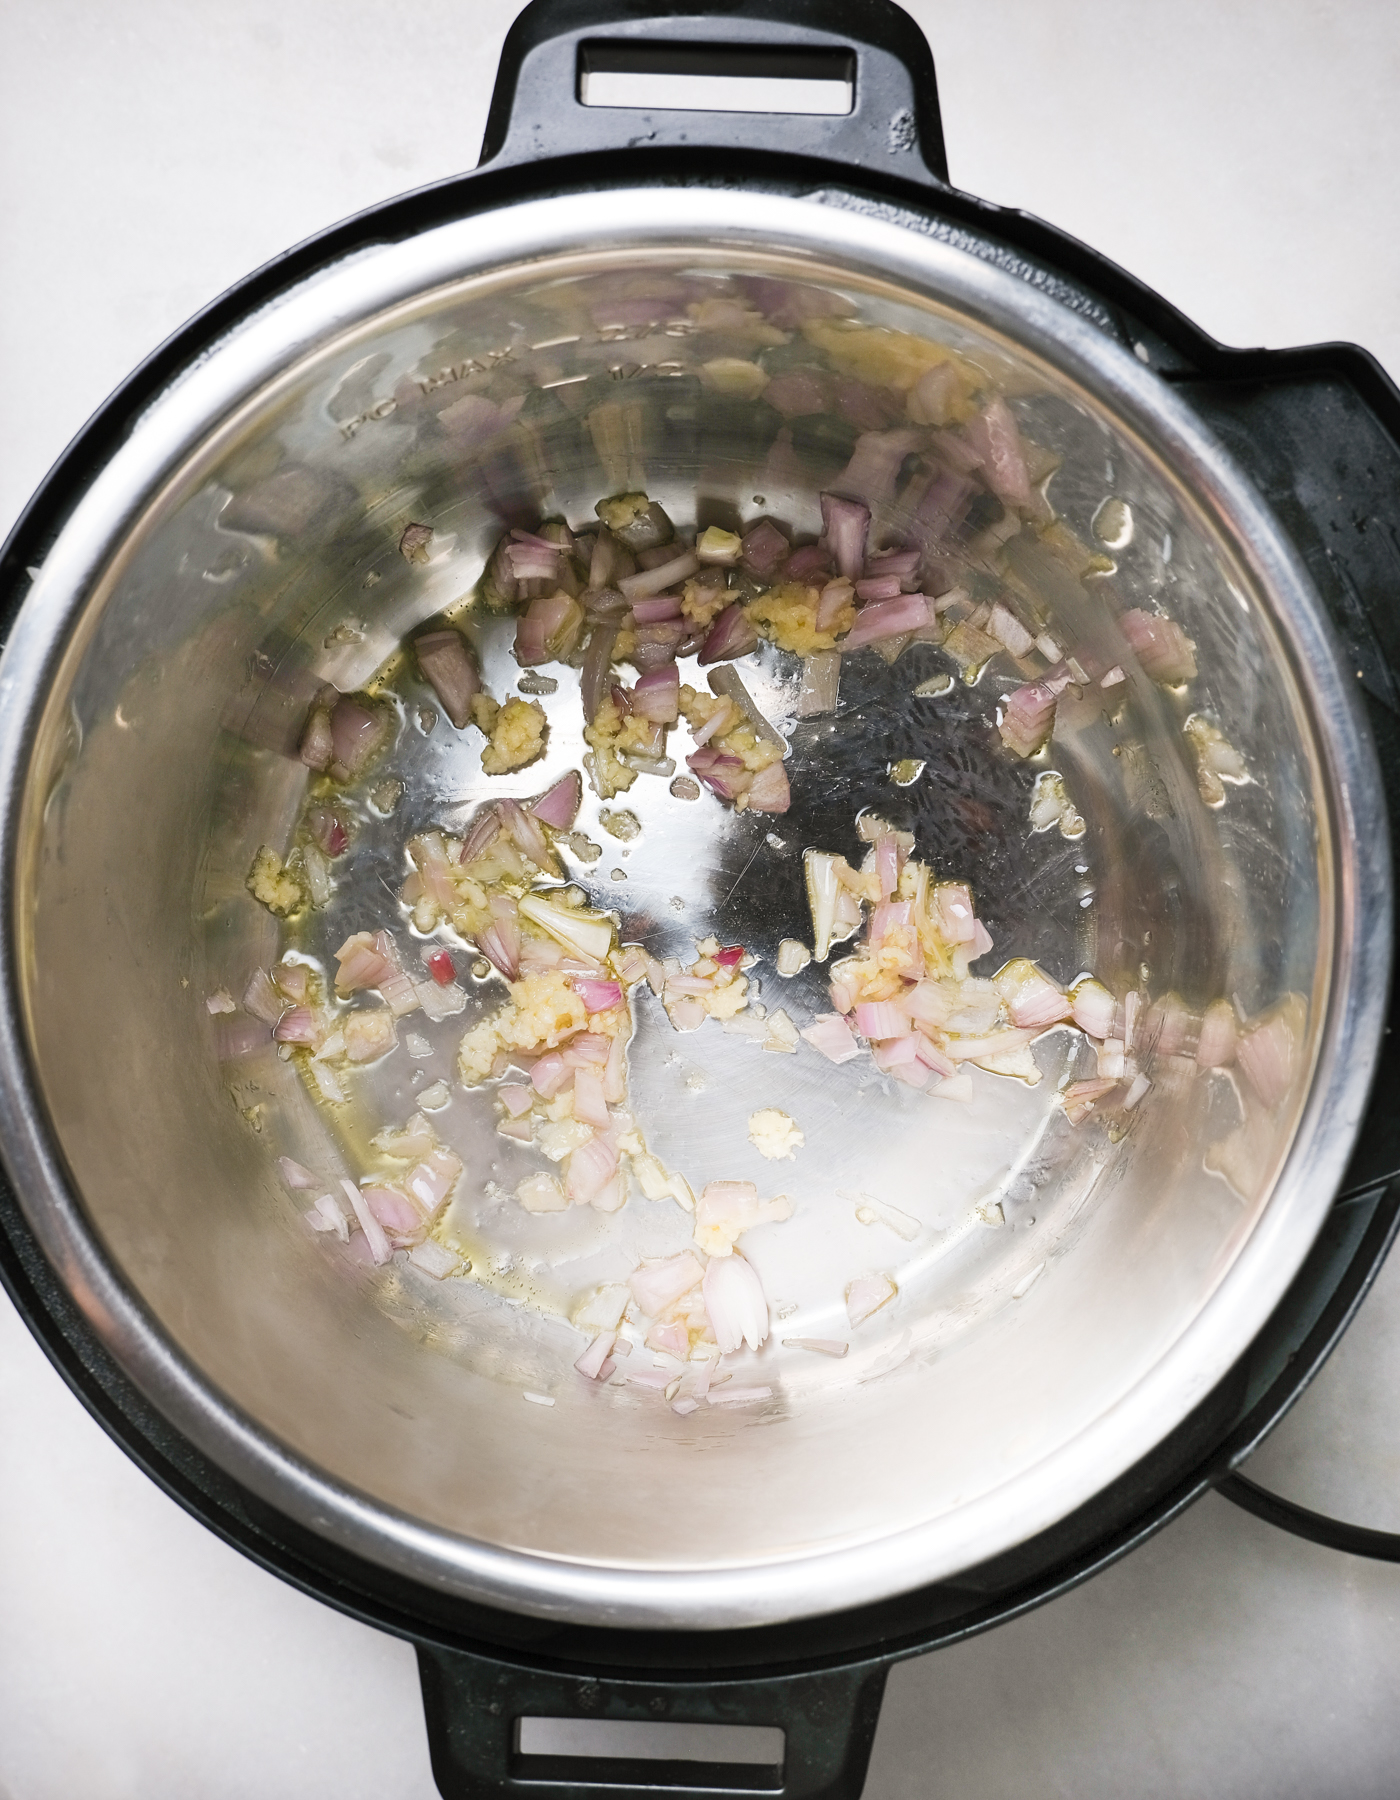 sauteeing shallots and garlic in the instant pot